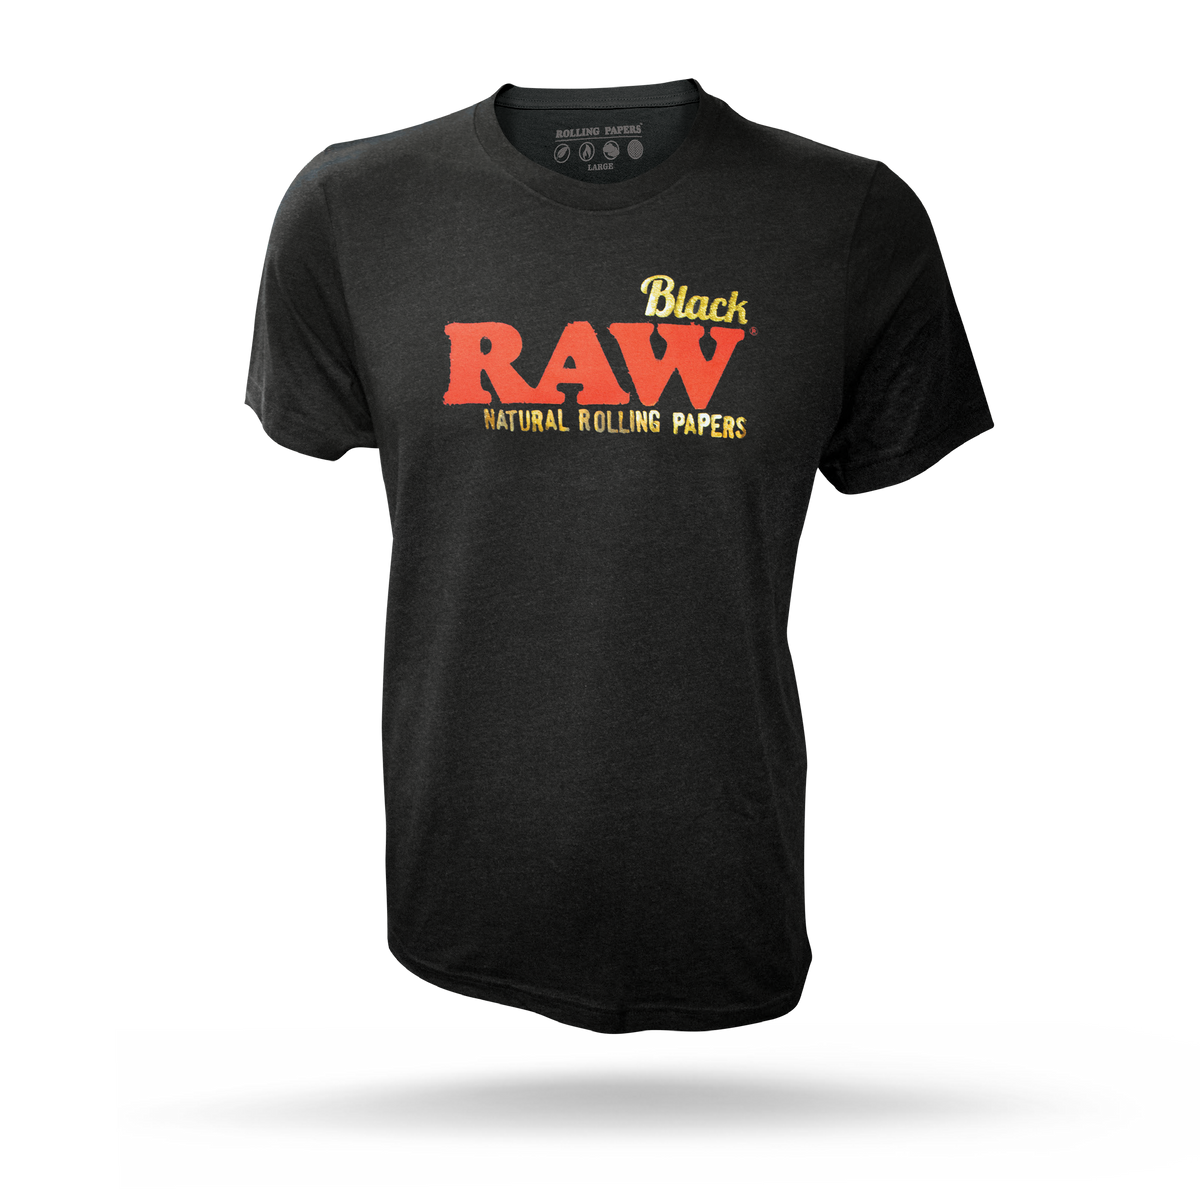 RAW Black Gold Foil T-Shirt | DISCONTINUED RAW Shirts esd-official